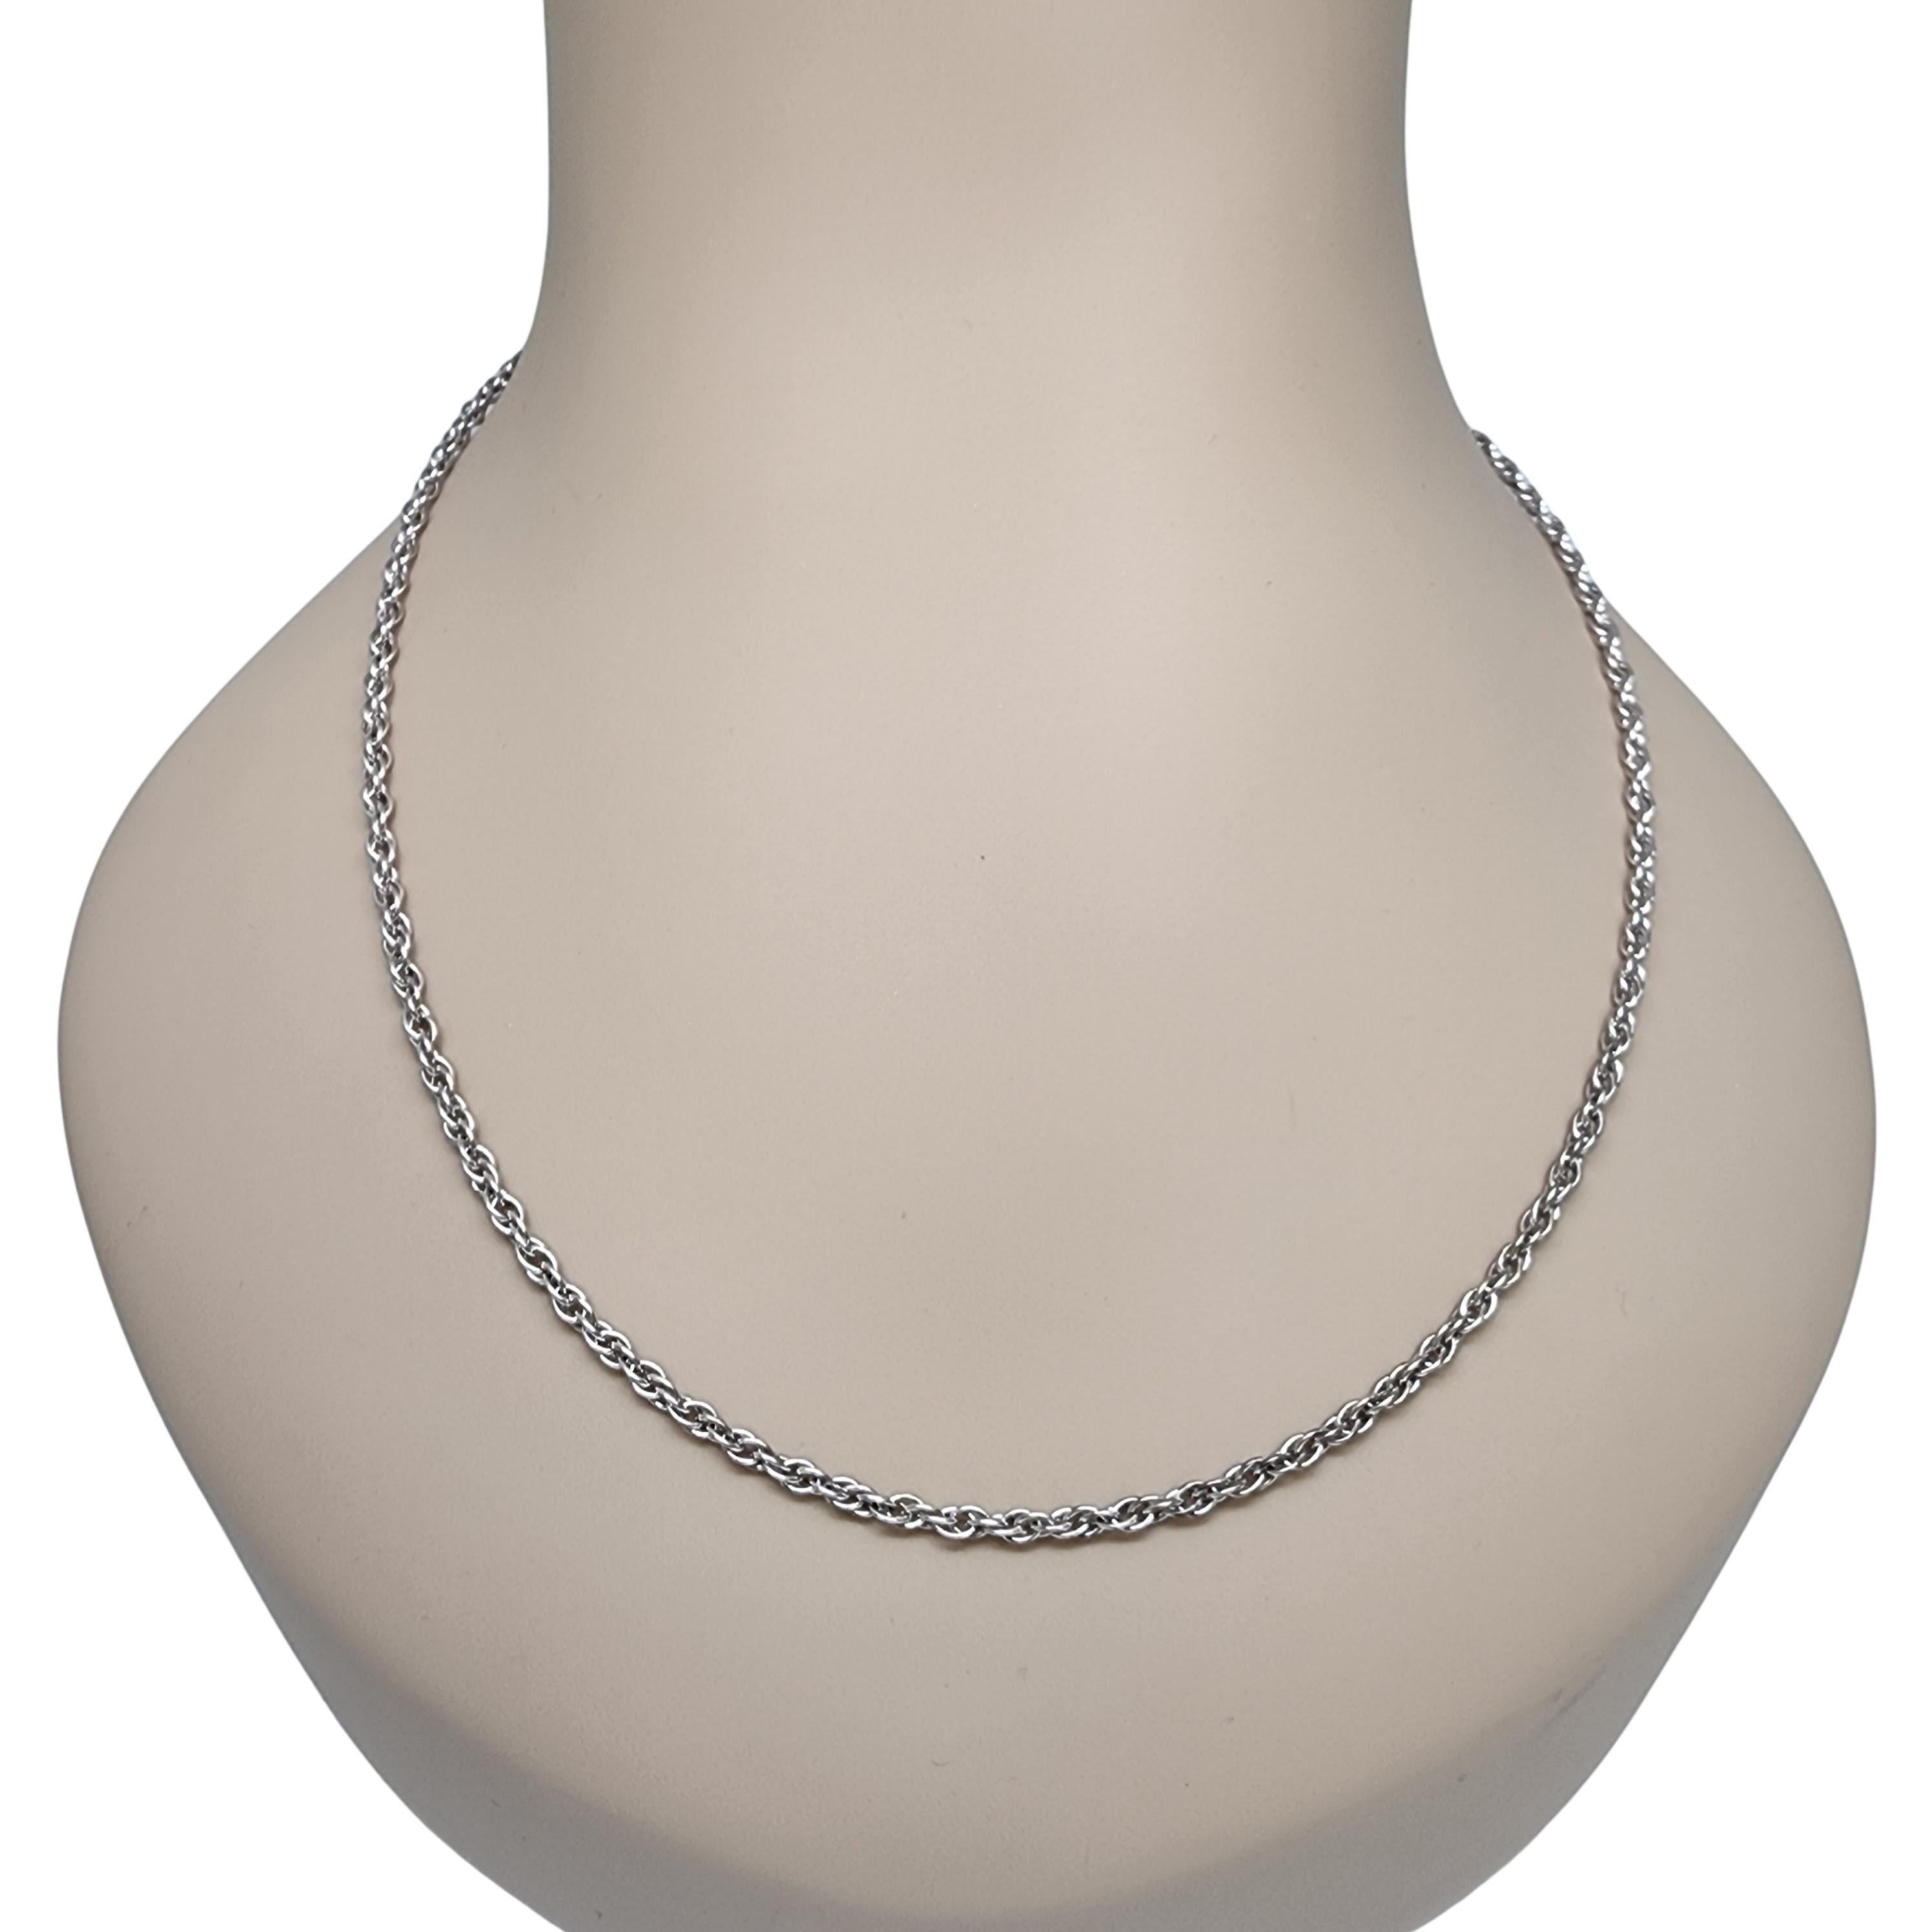 James Avery Sterling Silver Twist Chain Necklace #16610 For Sale 3